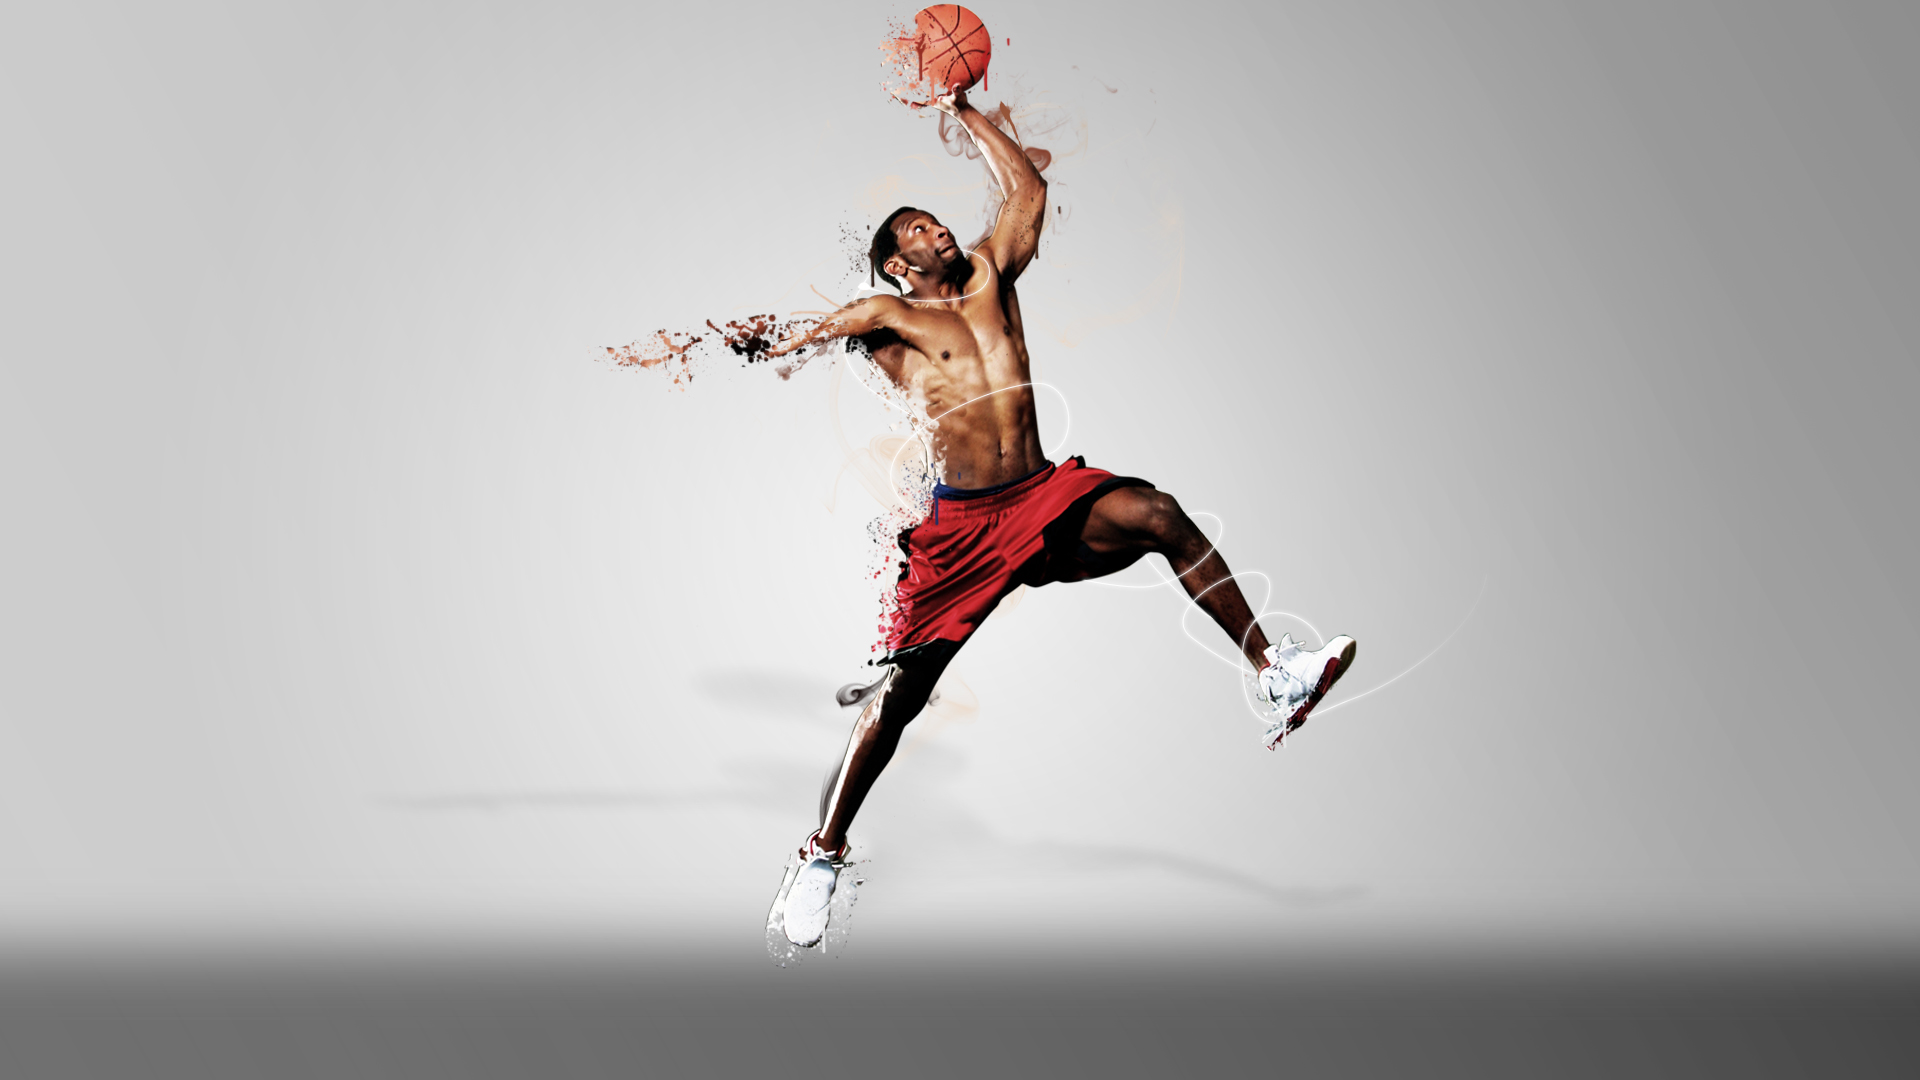 Free Sports Wallpapers Group (91+)